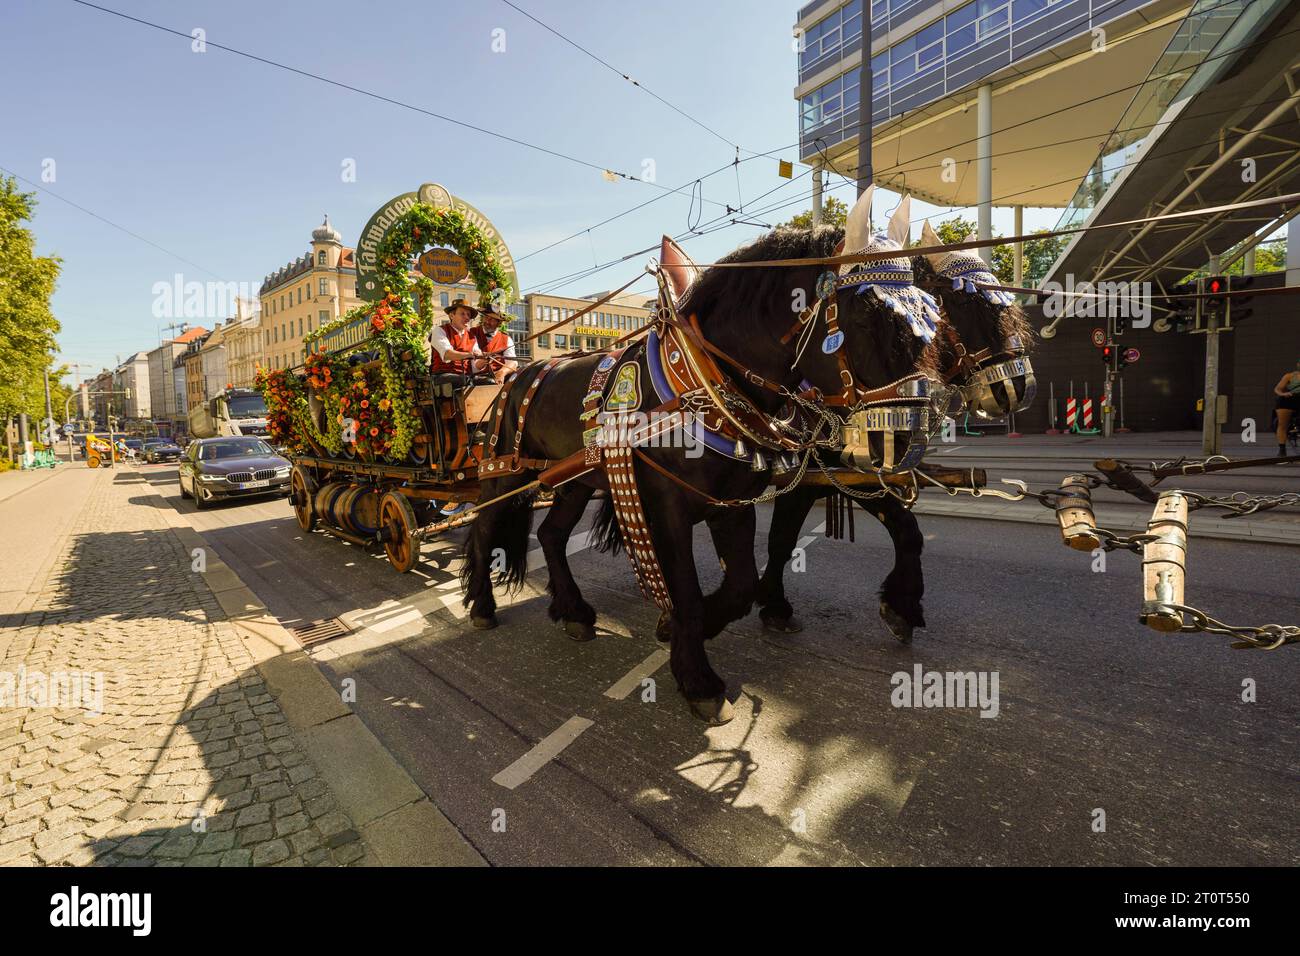 Munich, Germany, EU - Sept. 16, 2023. Oktoberfest Augustiner Beer Brewery Parade Float with horse drawn carriage, cart with beer keg barrels on street Stock Photo